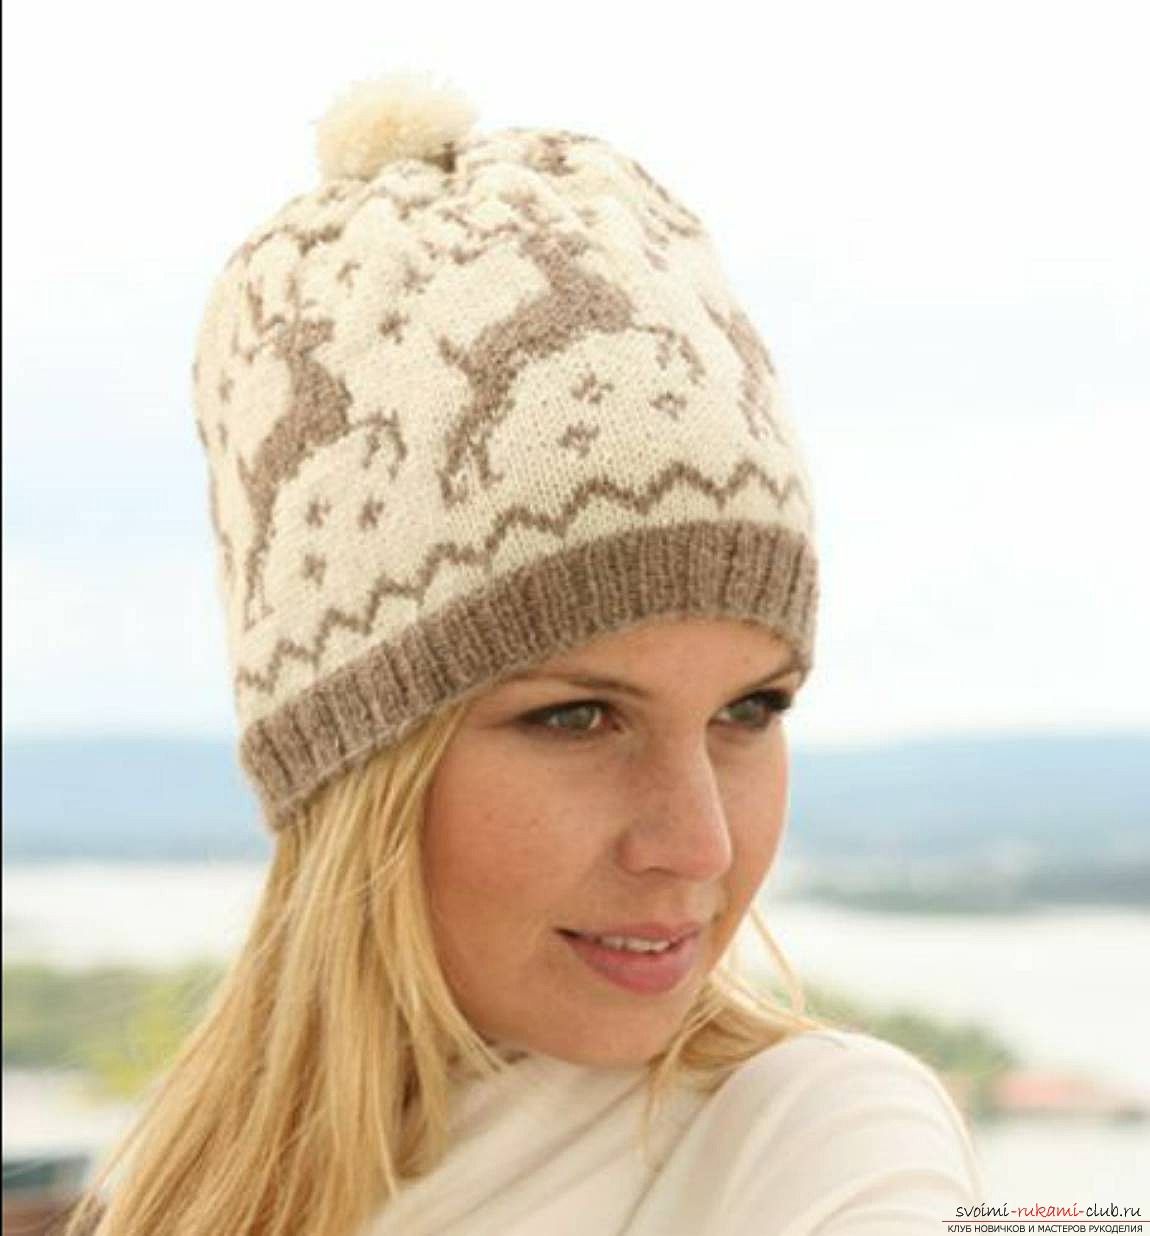 knitted needles original spring hat for women. Photo # 2